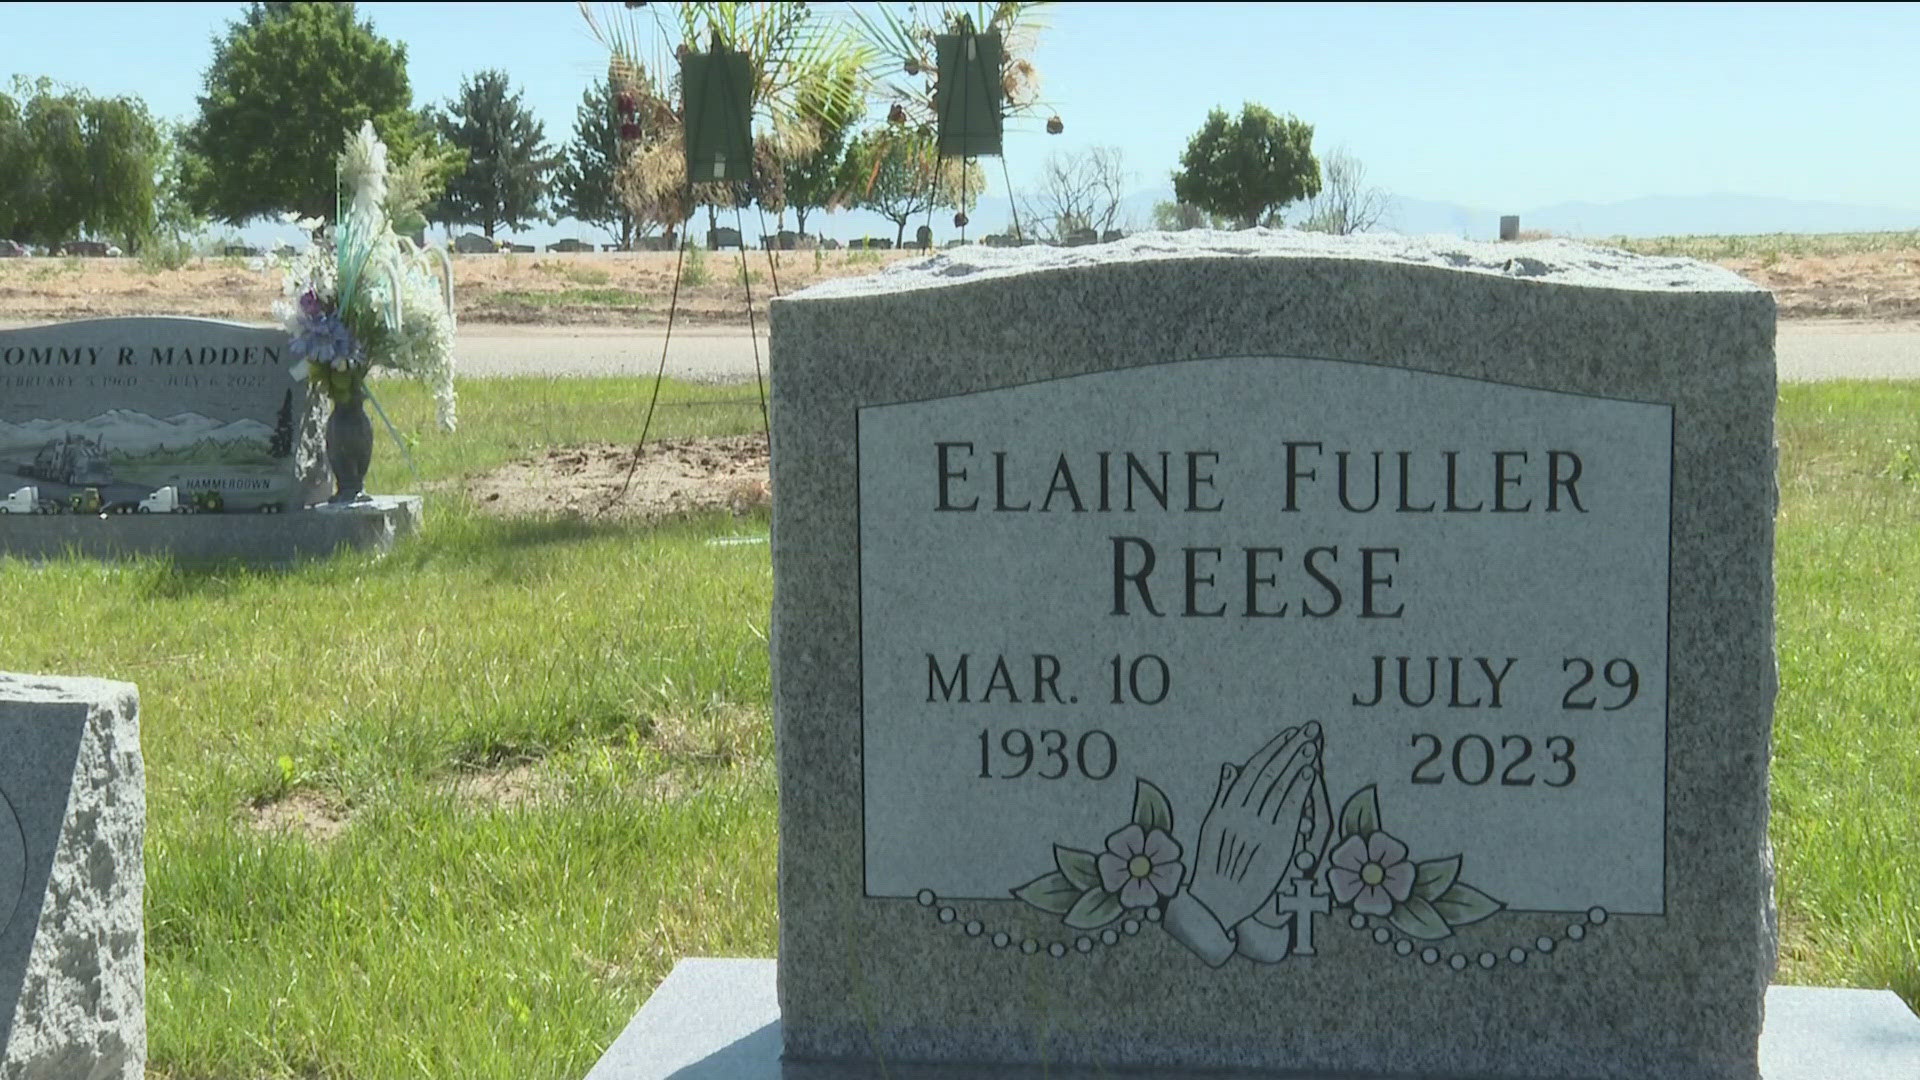 A Caldwell woman was buried in a gravesite different from the one she had requested. Now, her daughter is suing the city.